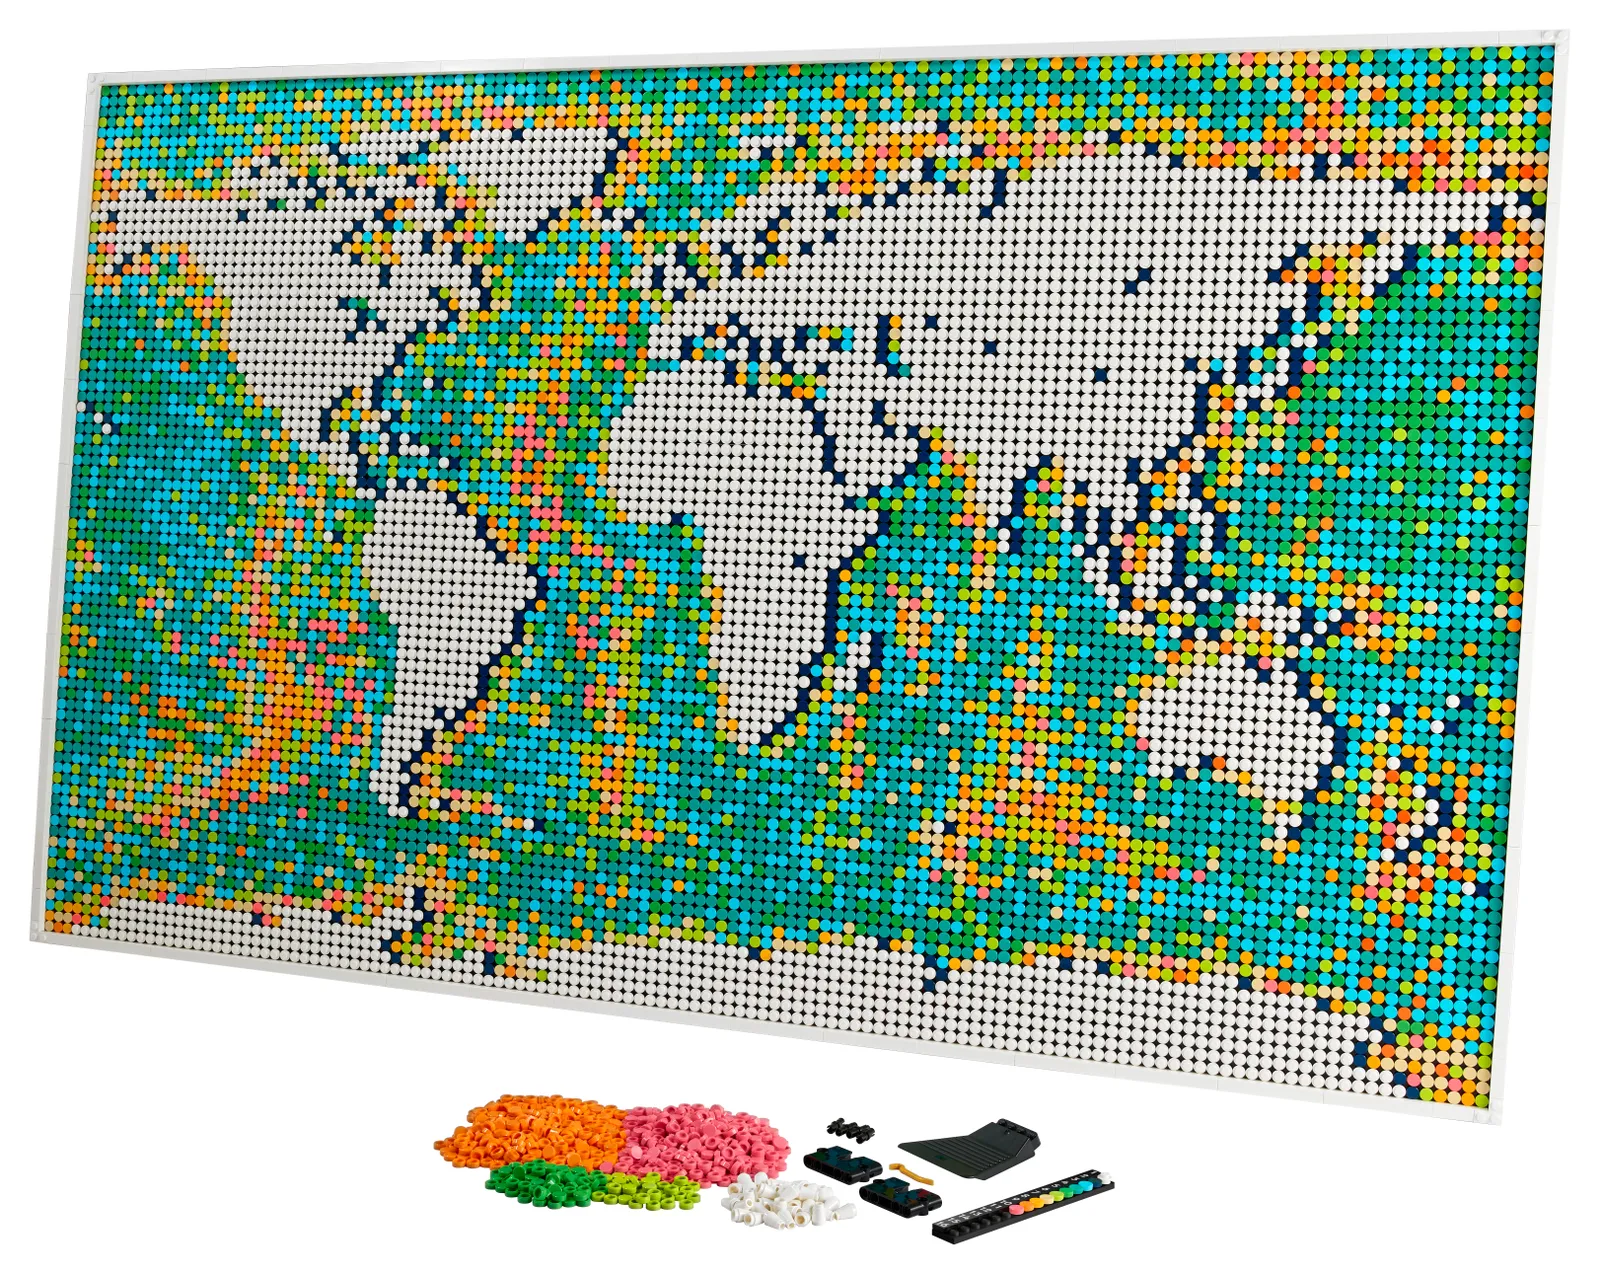 lego world map content